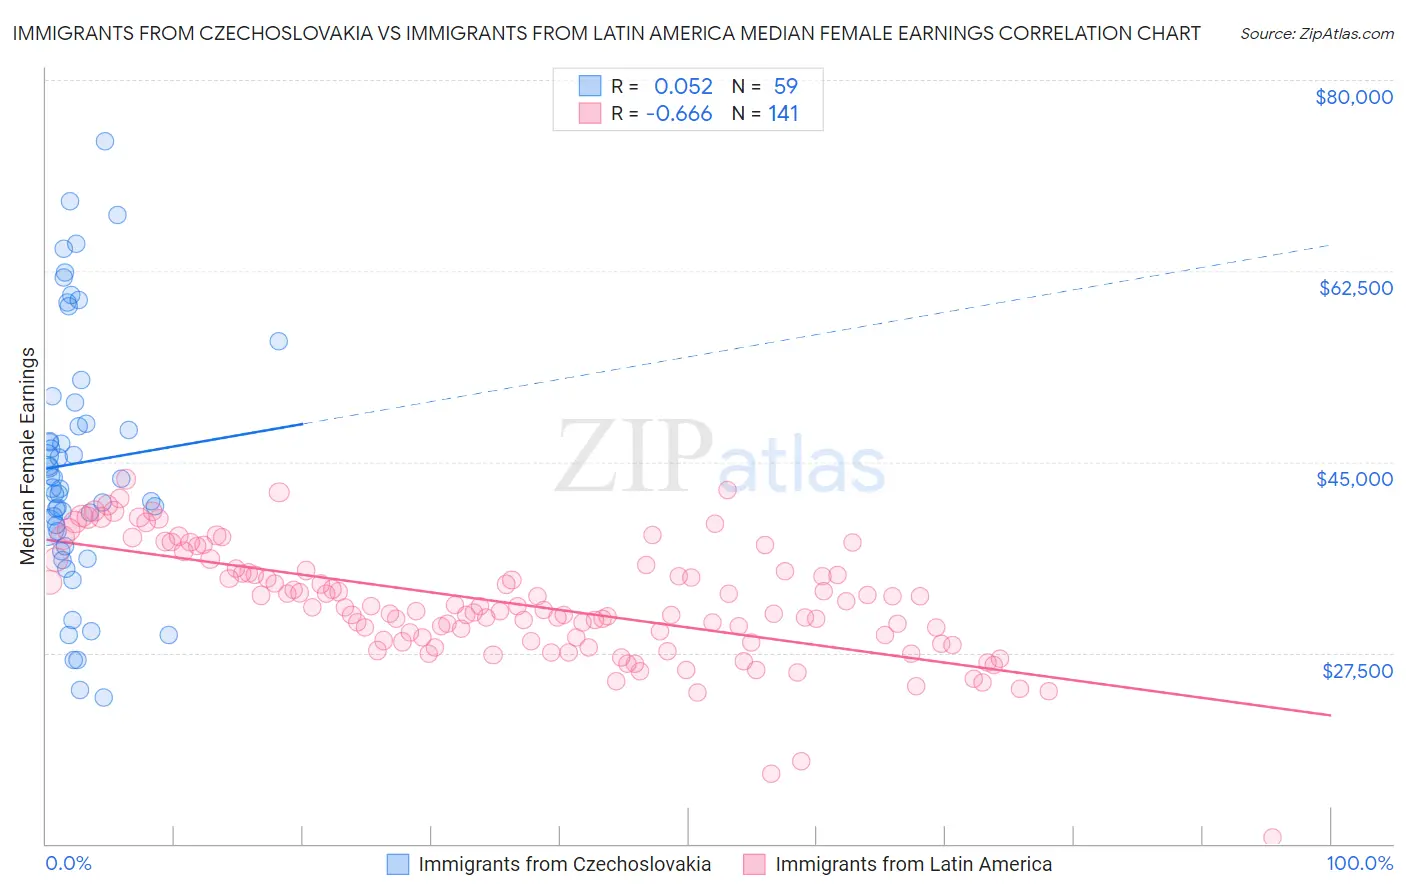 Immigrants from Czechoslovakia vs Immigrants from Latin America Median Female Earnings